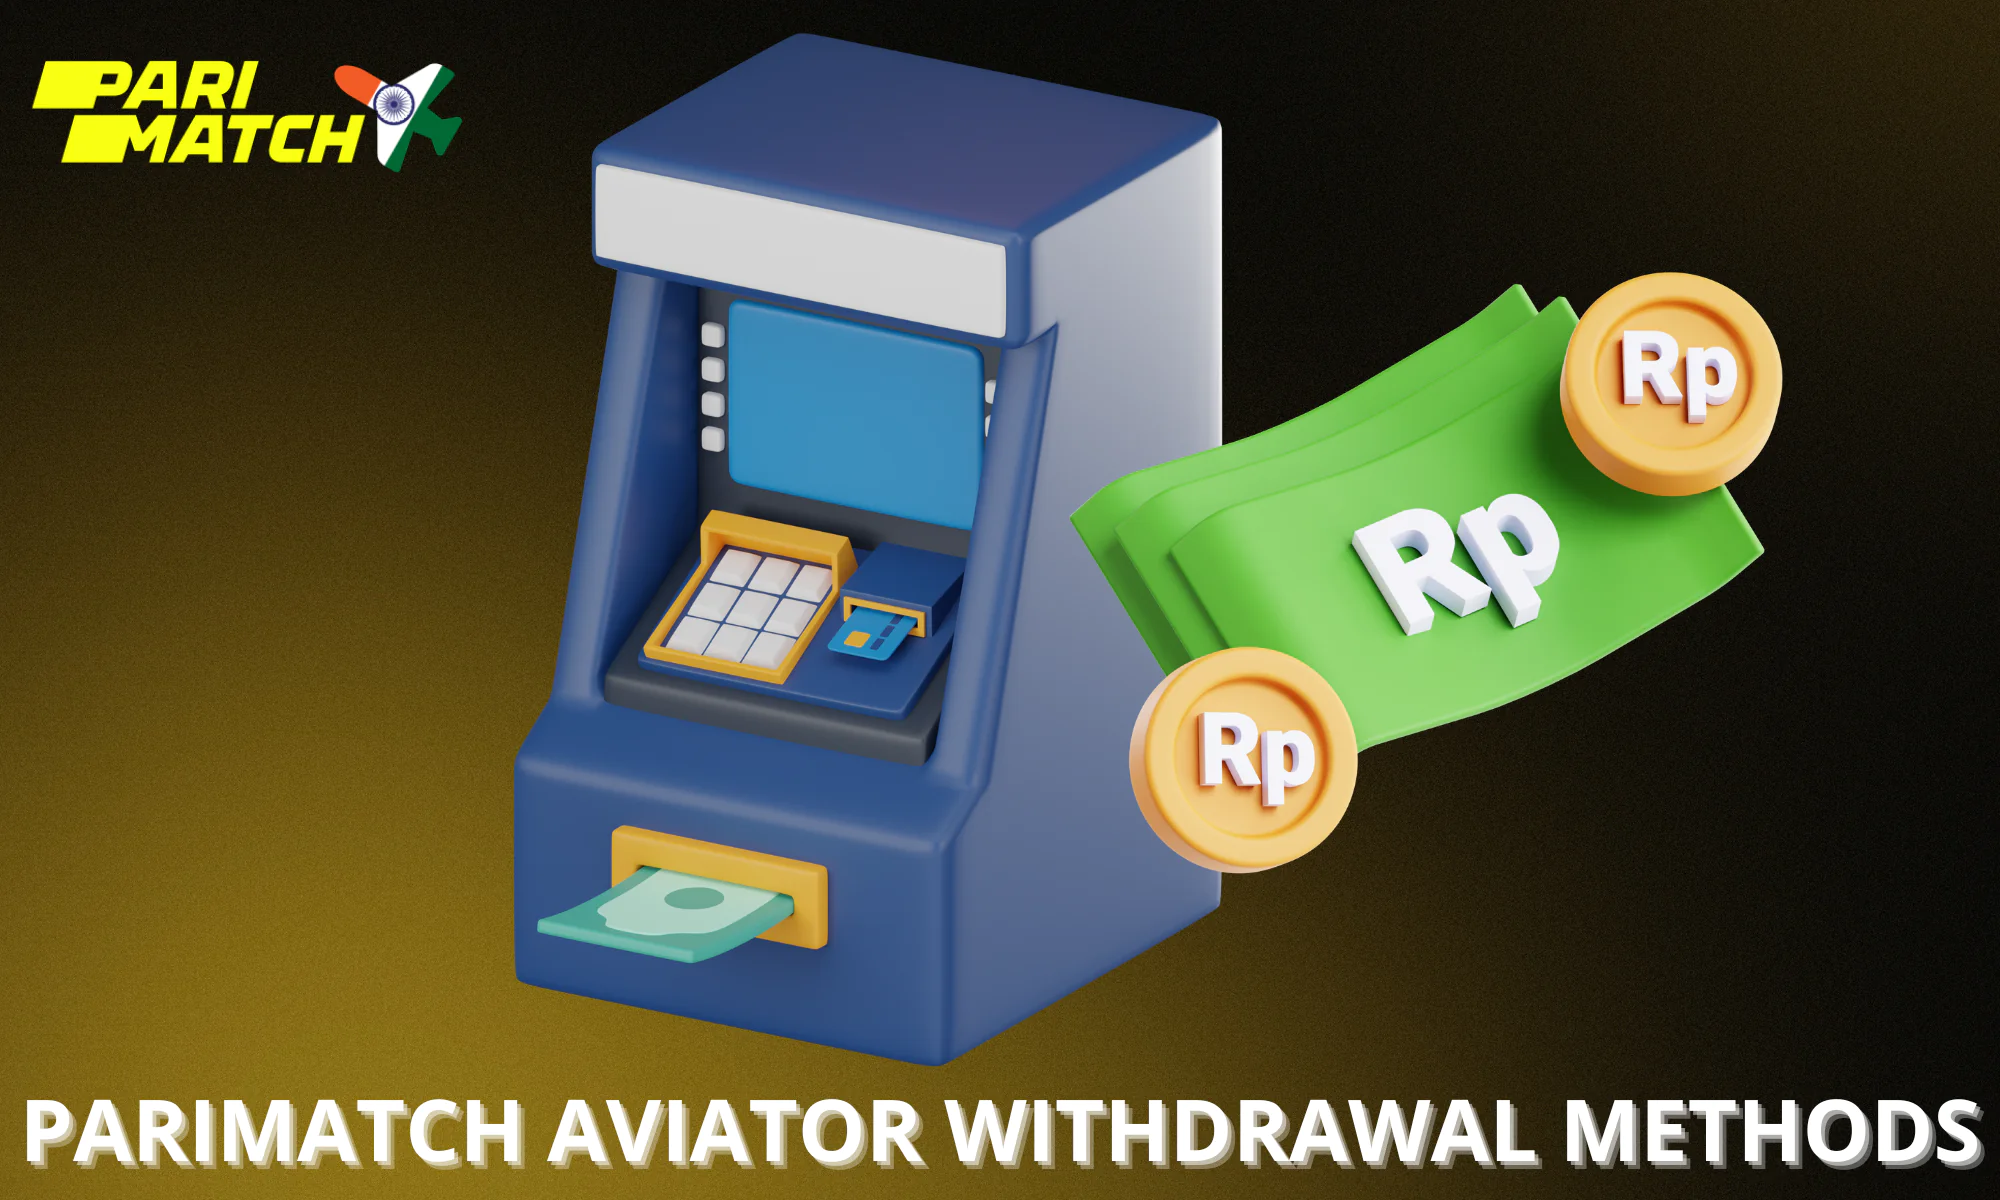 List of all available withdrawal methods in Parimatch Aviator